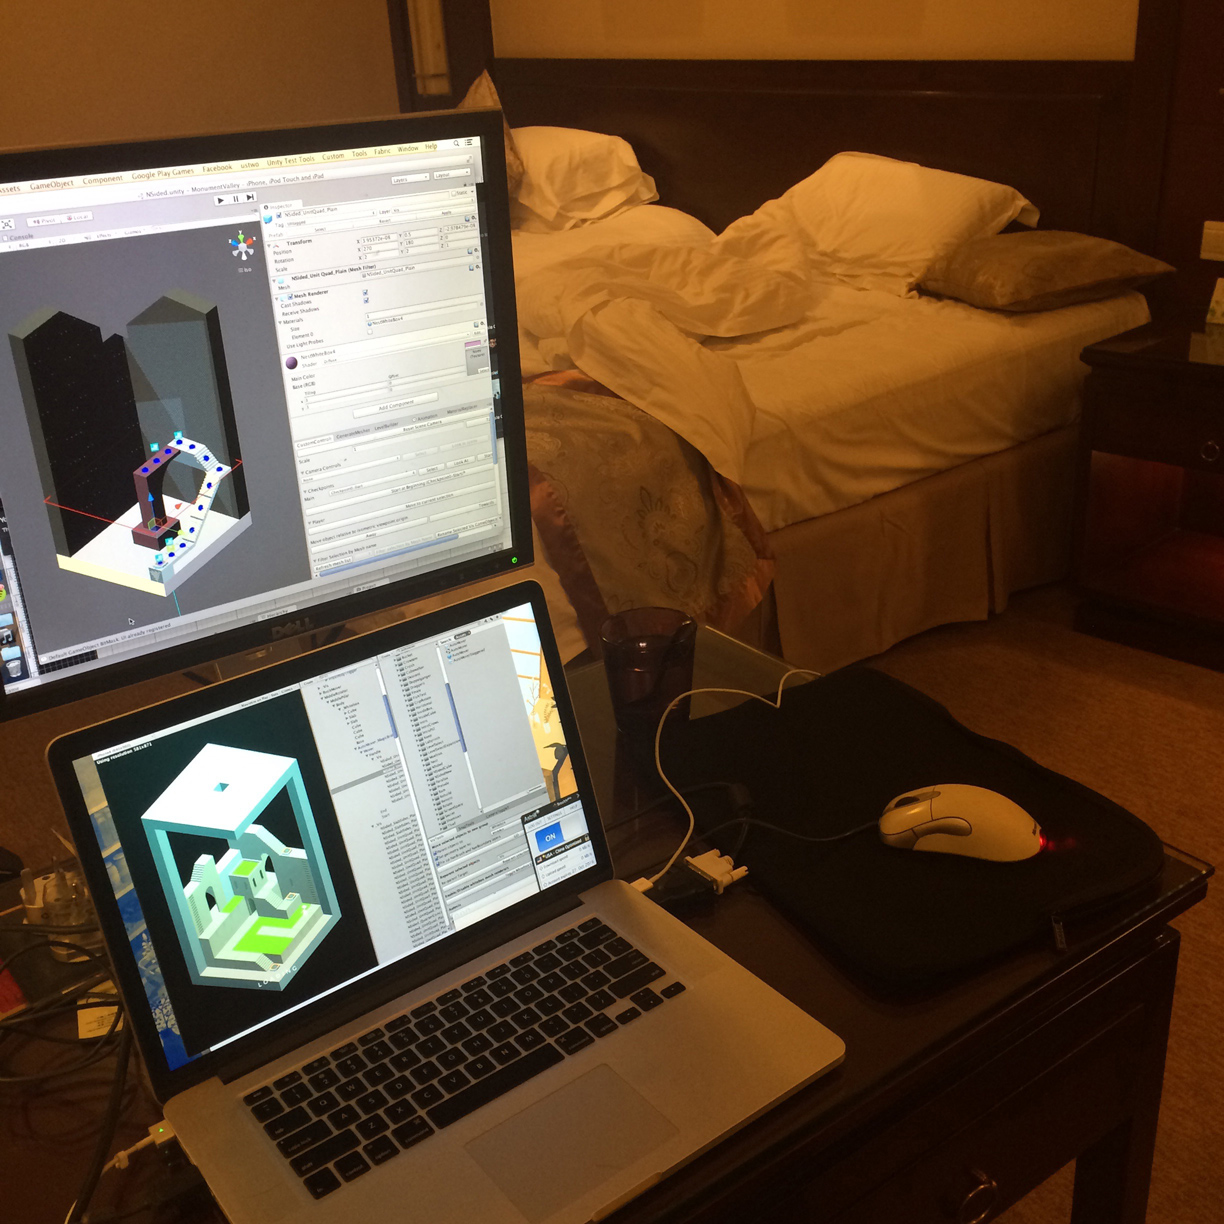  Doing an art pass on The Oubliette from a hotel room in Shanghai with a borrowed monitor 